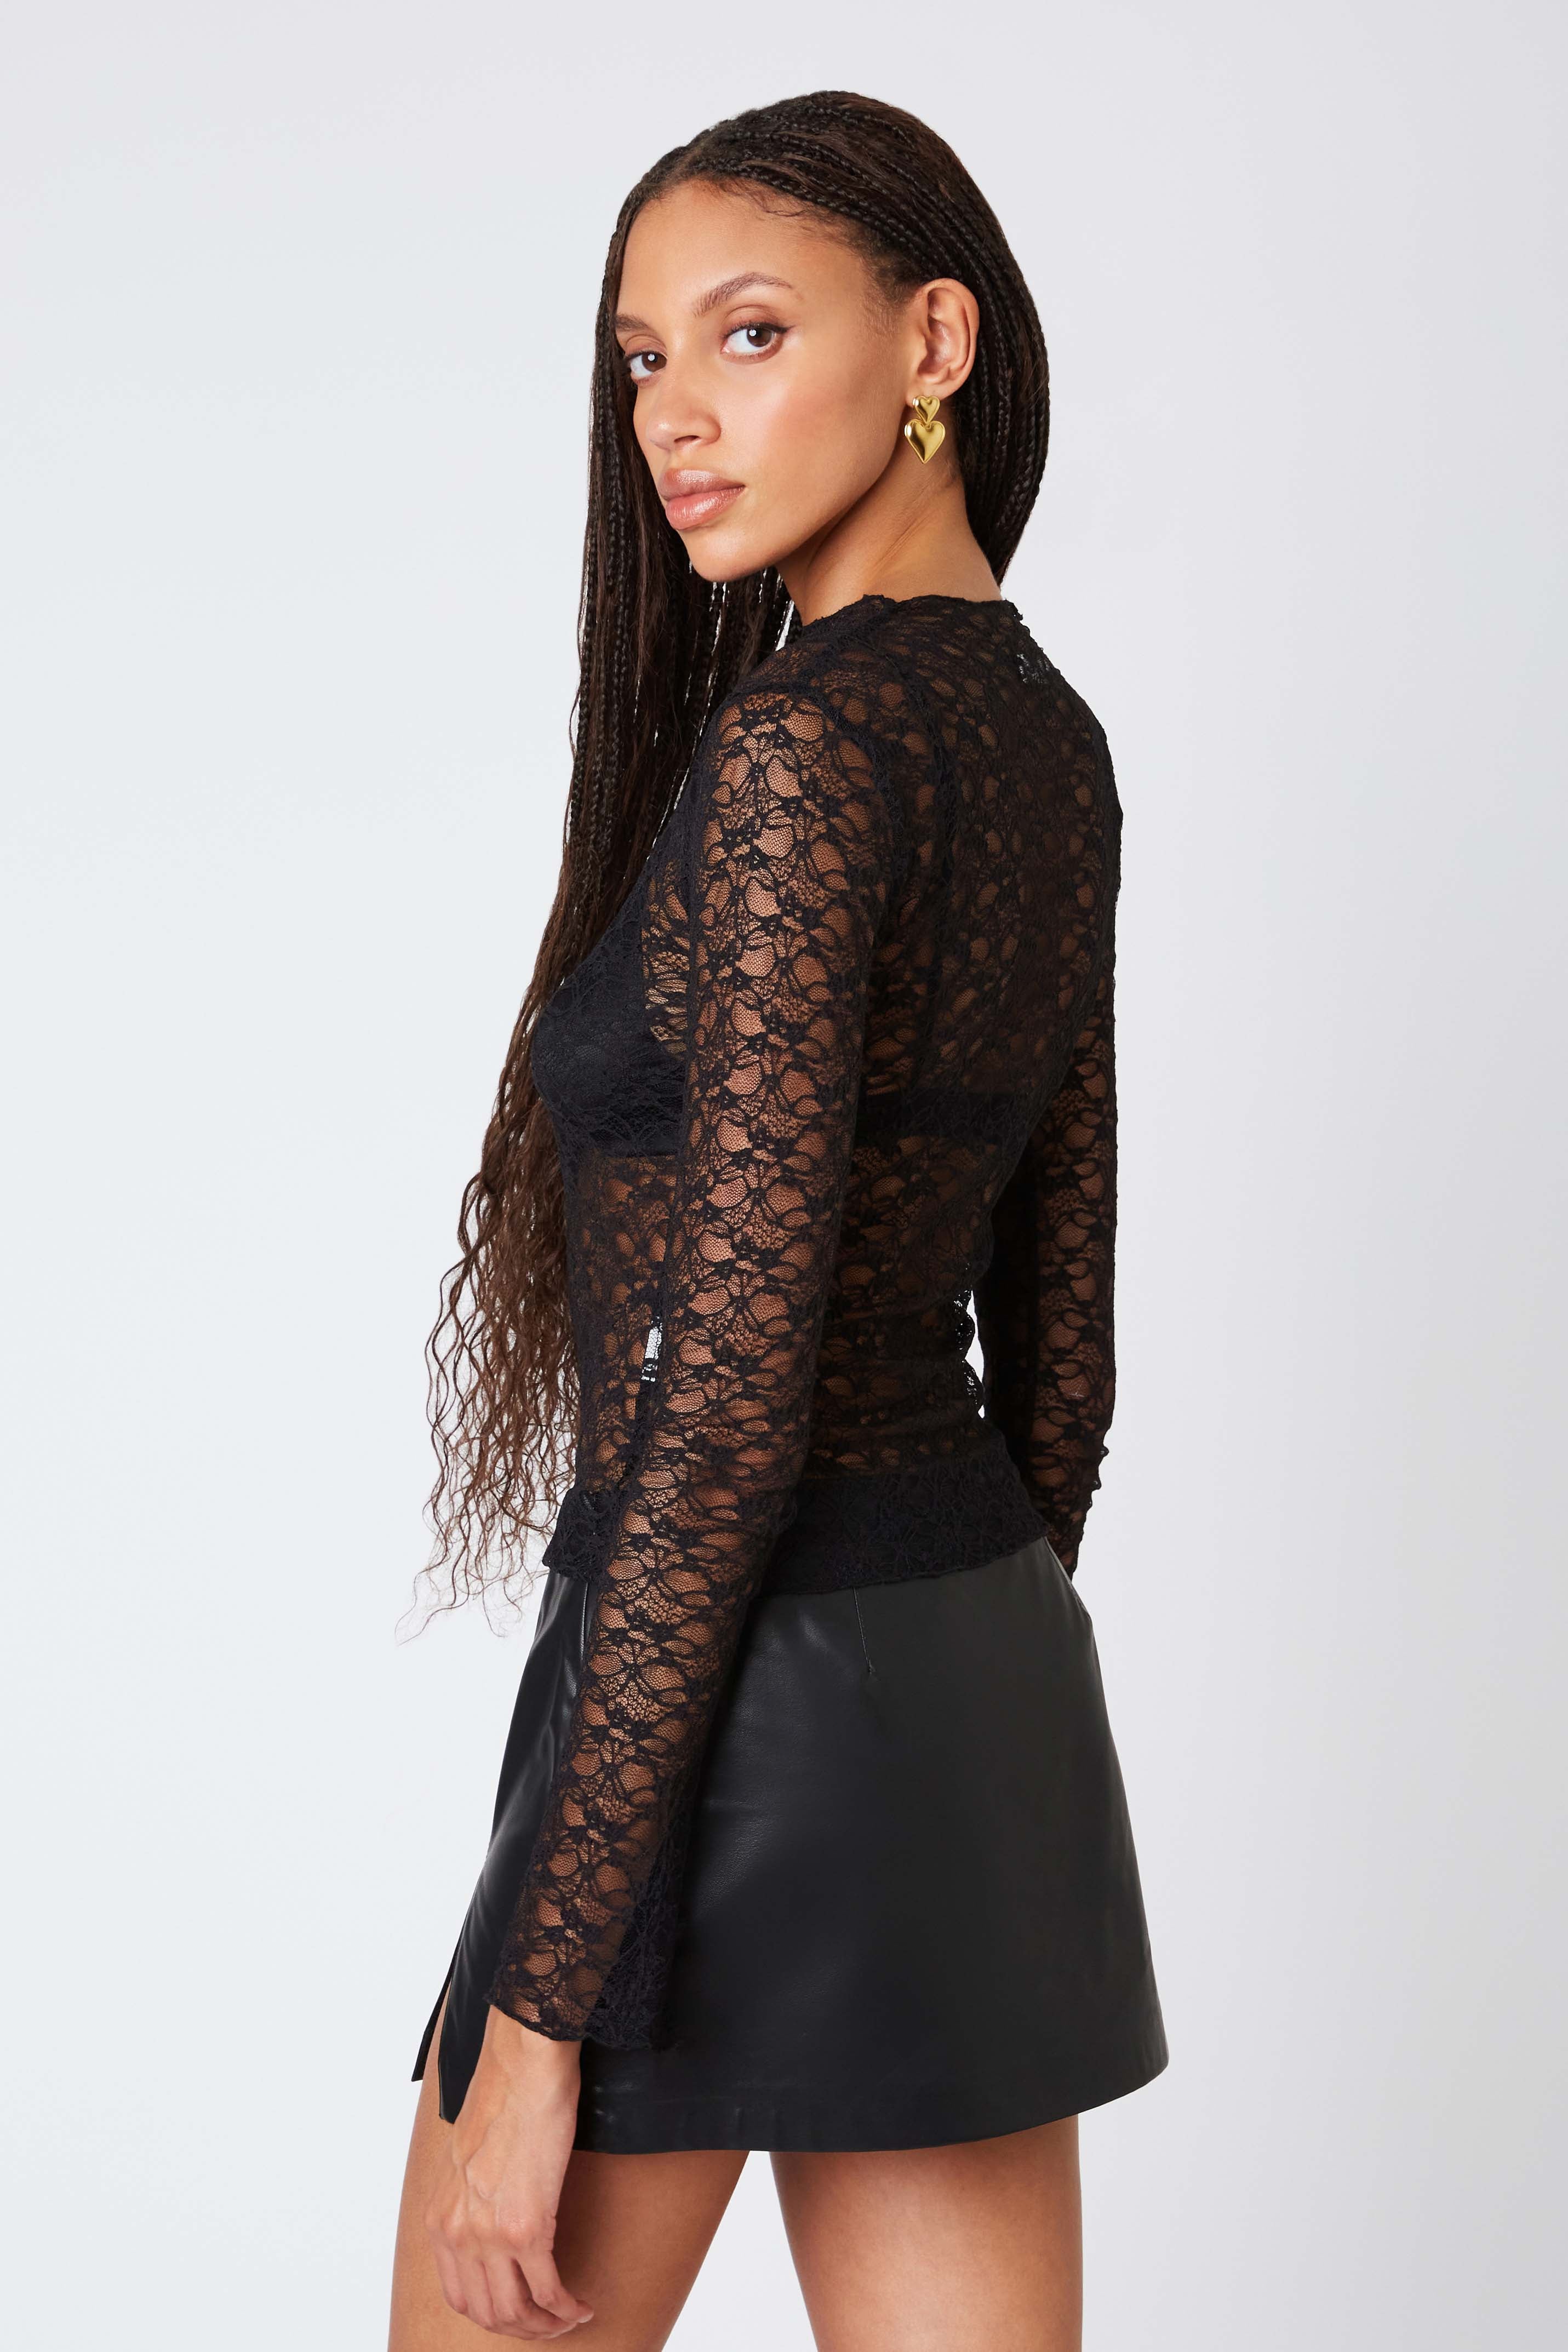 Floral Lace Long Sleeve in Black Back View